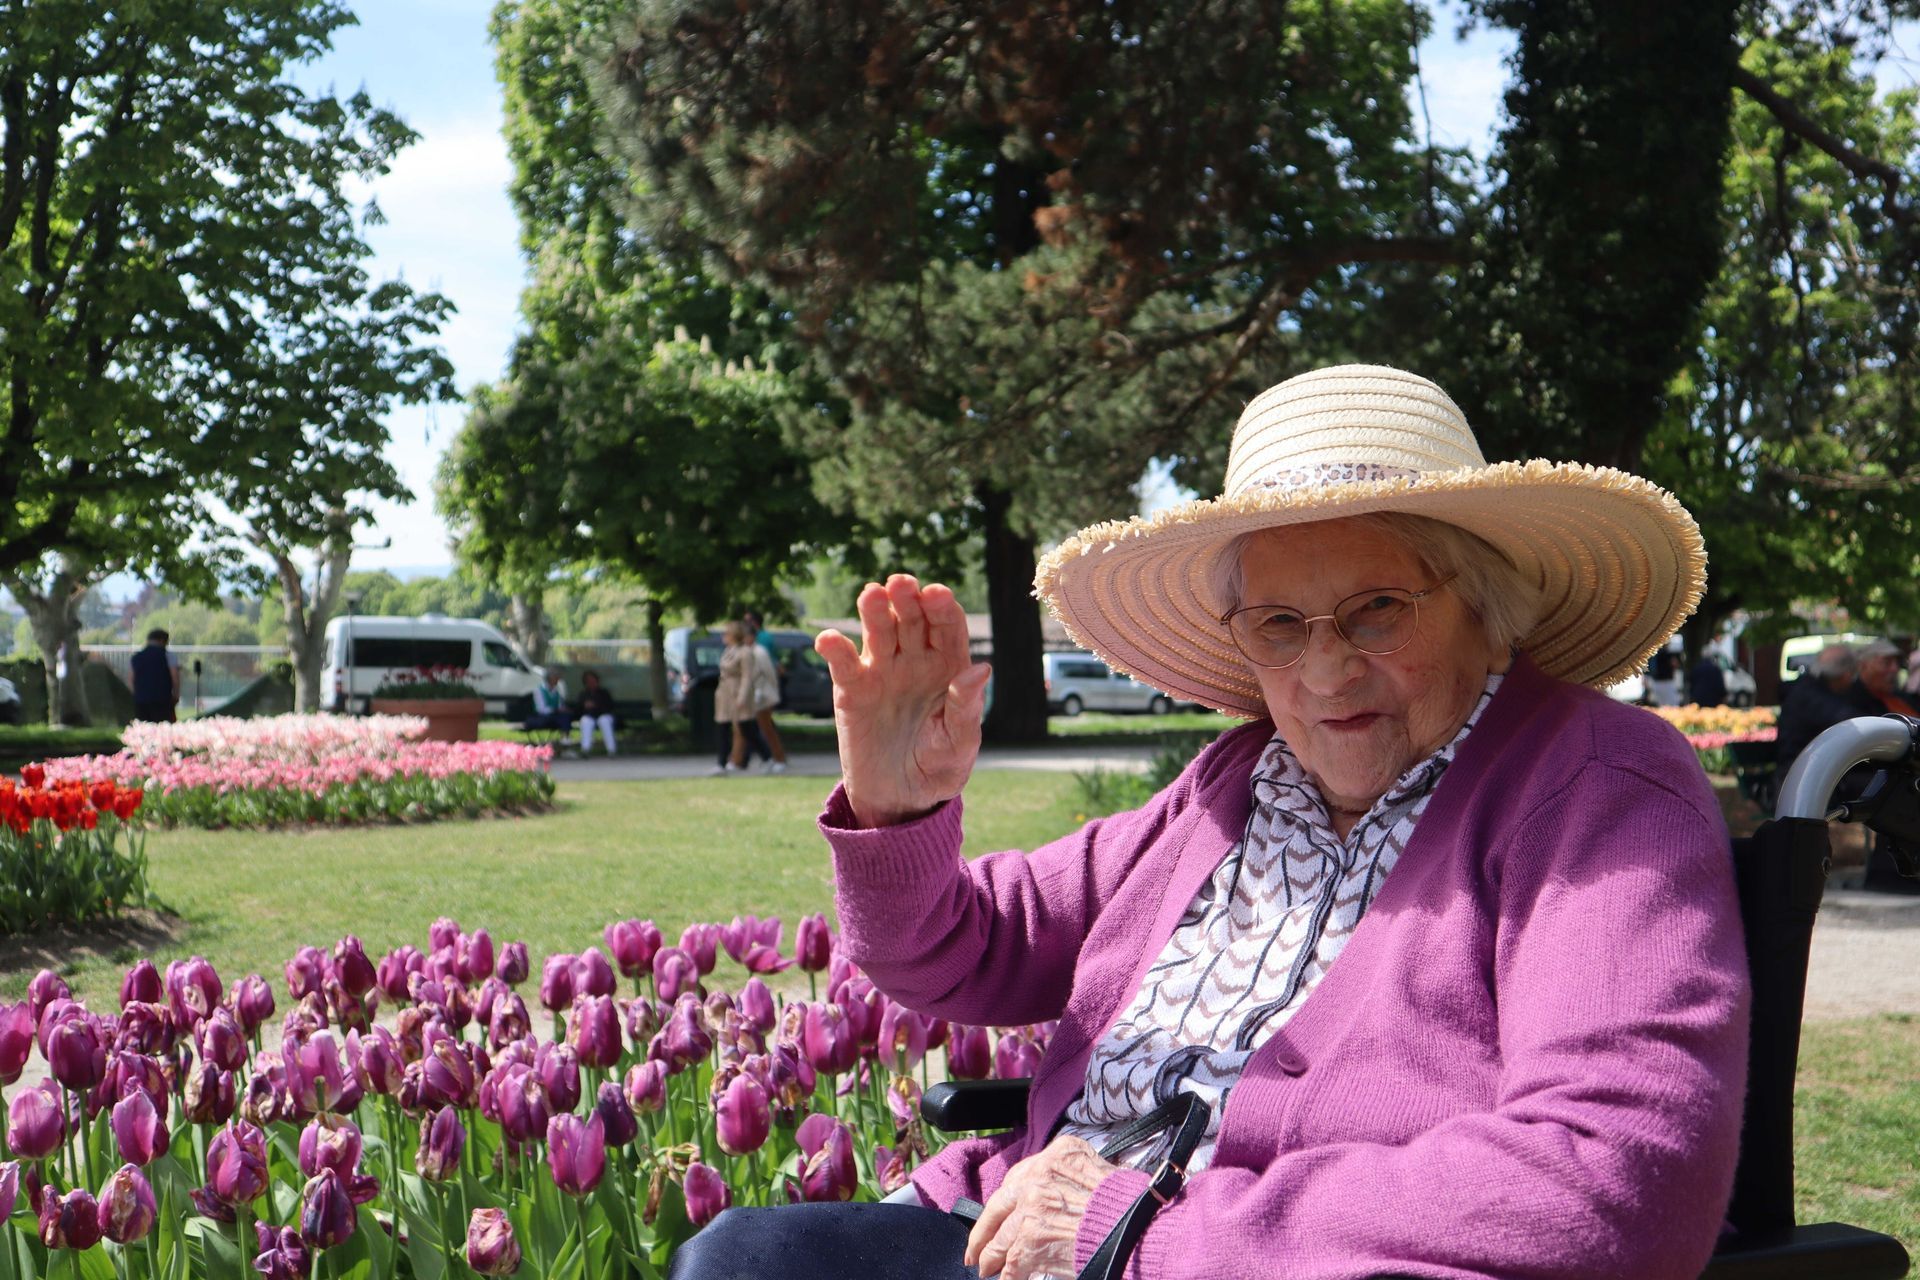 An elderly woman wearing a hat is sitting on a bench in a flower-filled park.